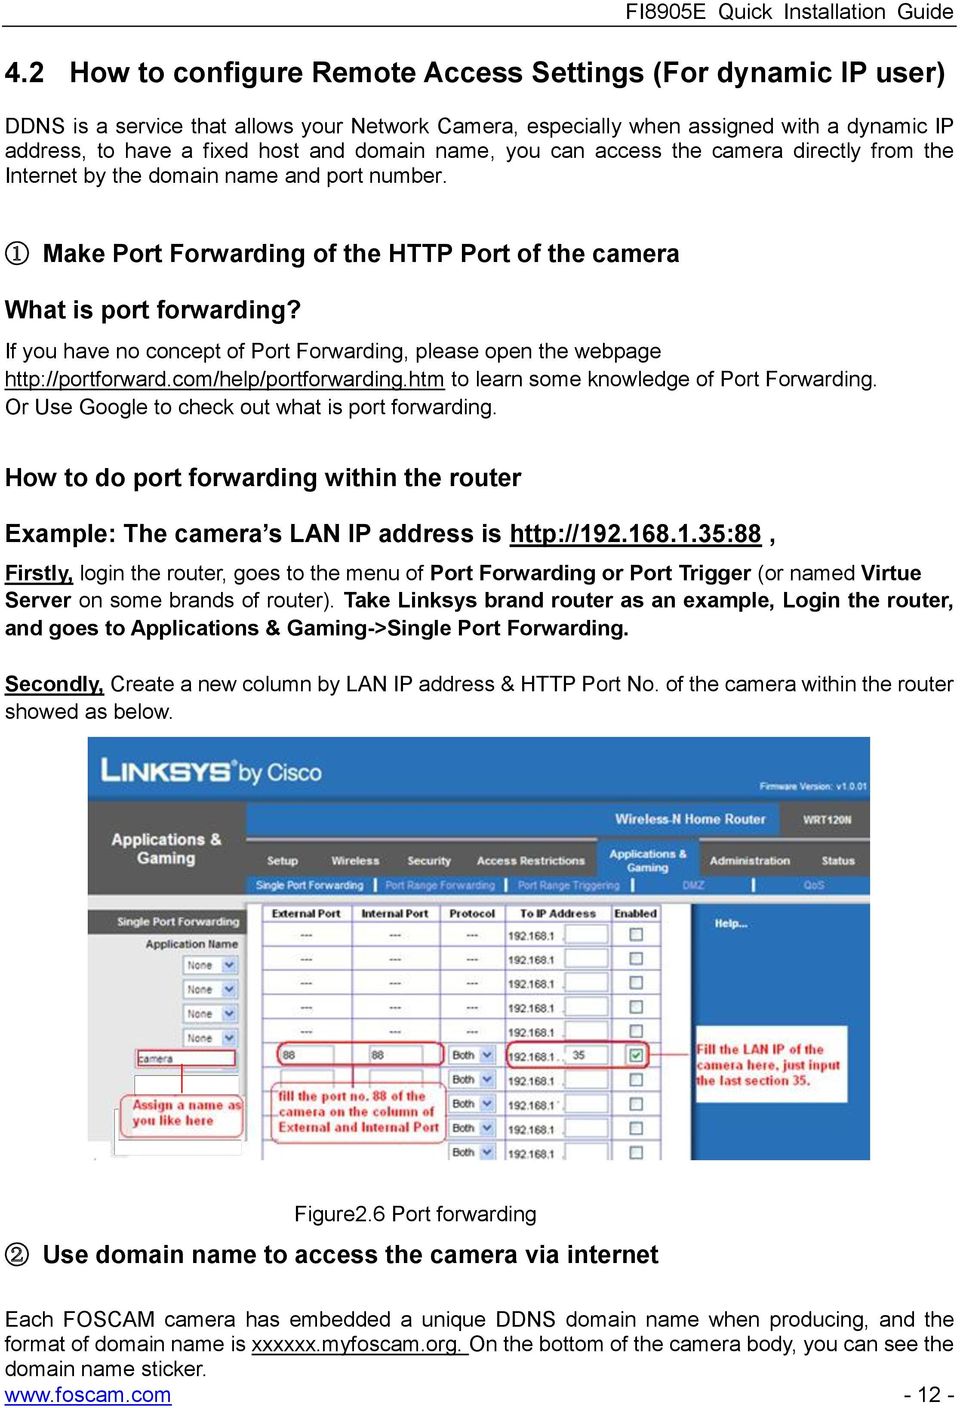 If you have no concept of Port Forwarding, please open the webpage http://portforward.com/help/portforwarding.htm to learn some knowledge of Port Forwarding.